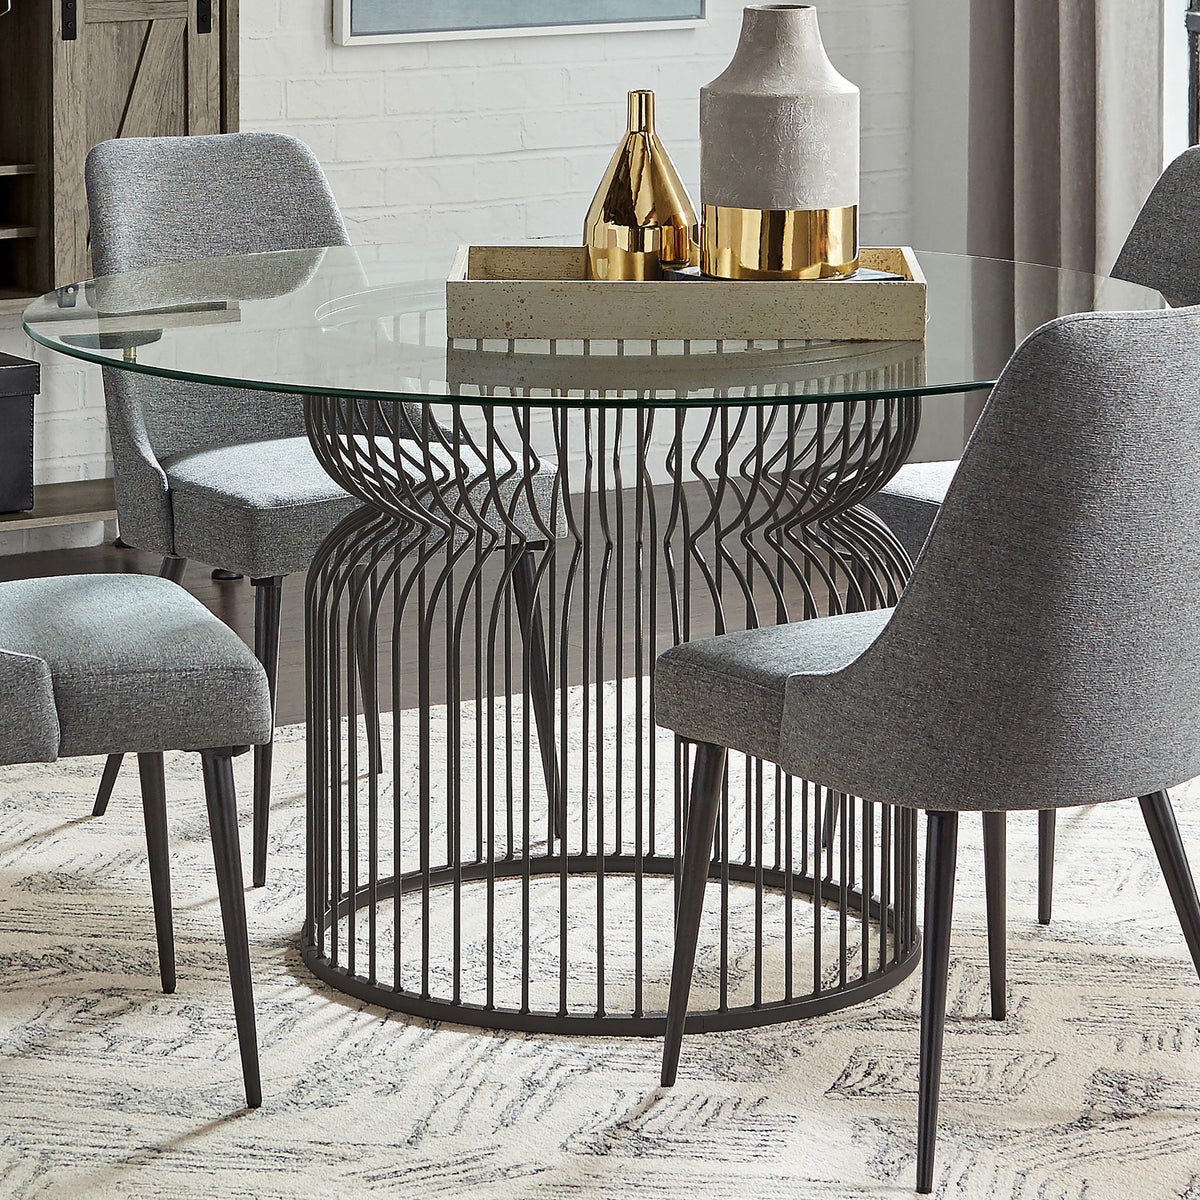 Granvia Round Glass Top Dining Table Clear and Gunmetal Granvia Round Glass Top Dining Table Clear and Gunmetal Half Price Furniture